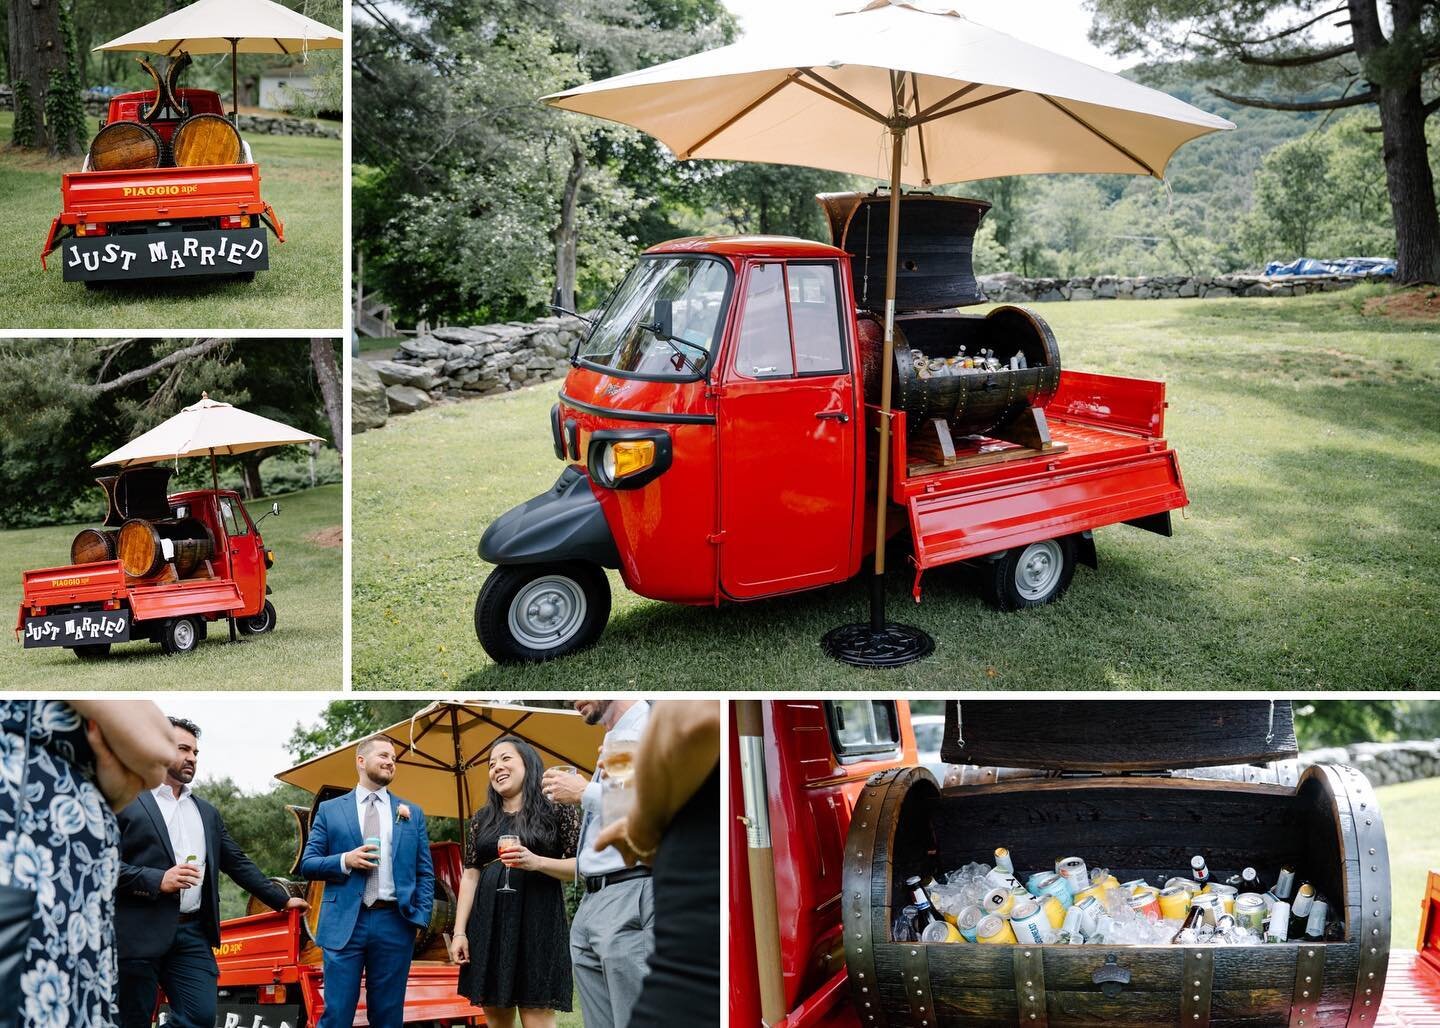 Fiery red hot new Italian Piaggio Ape Mobile Bar rolling out to your next event&hellip;

#mobilebar #piaggioape #italianpiaggio #weddings #weddingreception #weddingseason #privateevents #winebarrels #baronwheels #customizedbar #summersoiree #rrevents